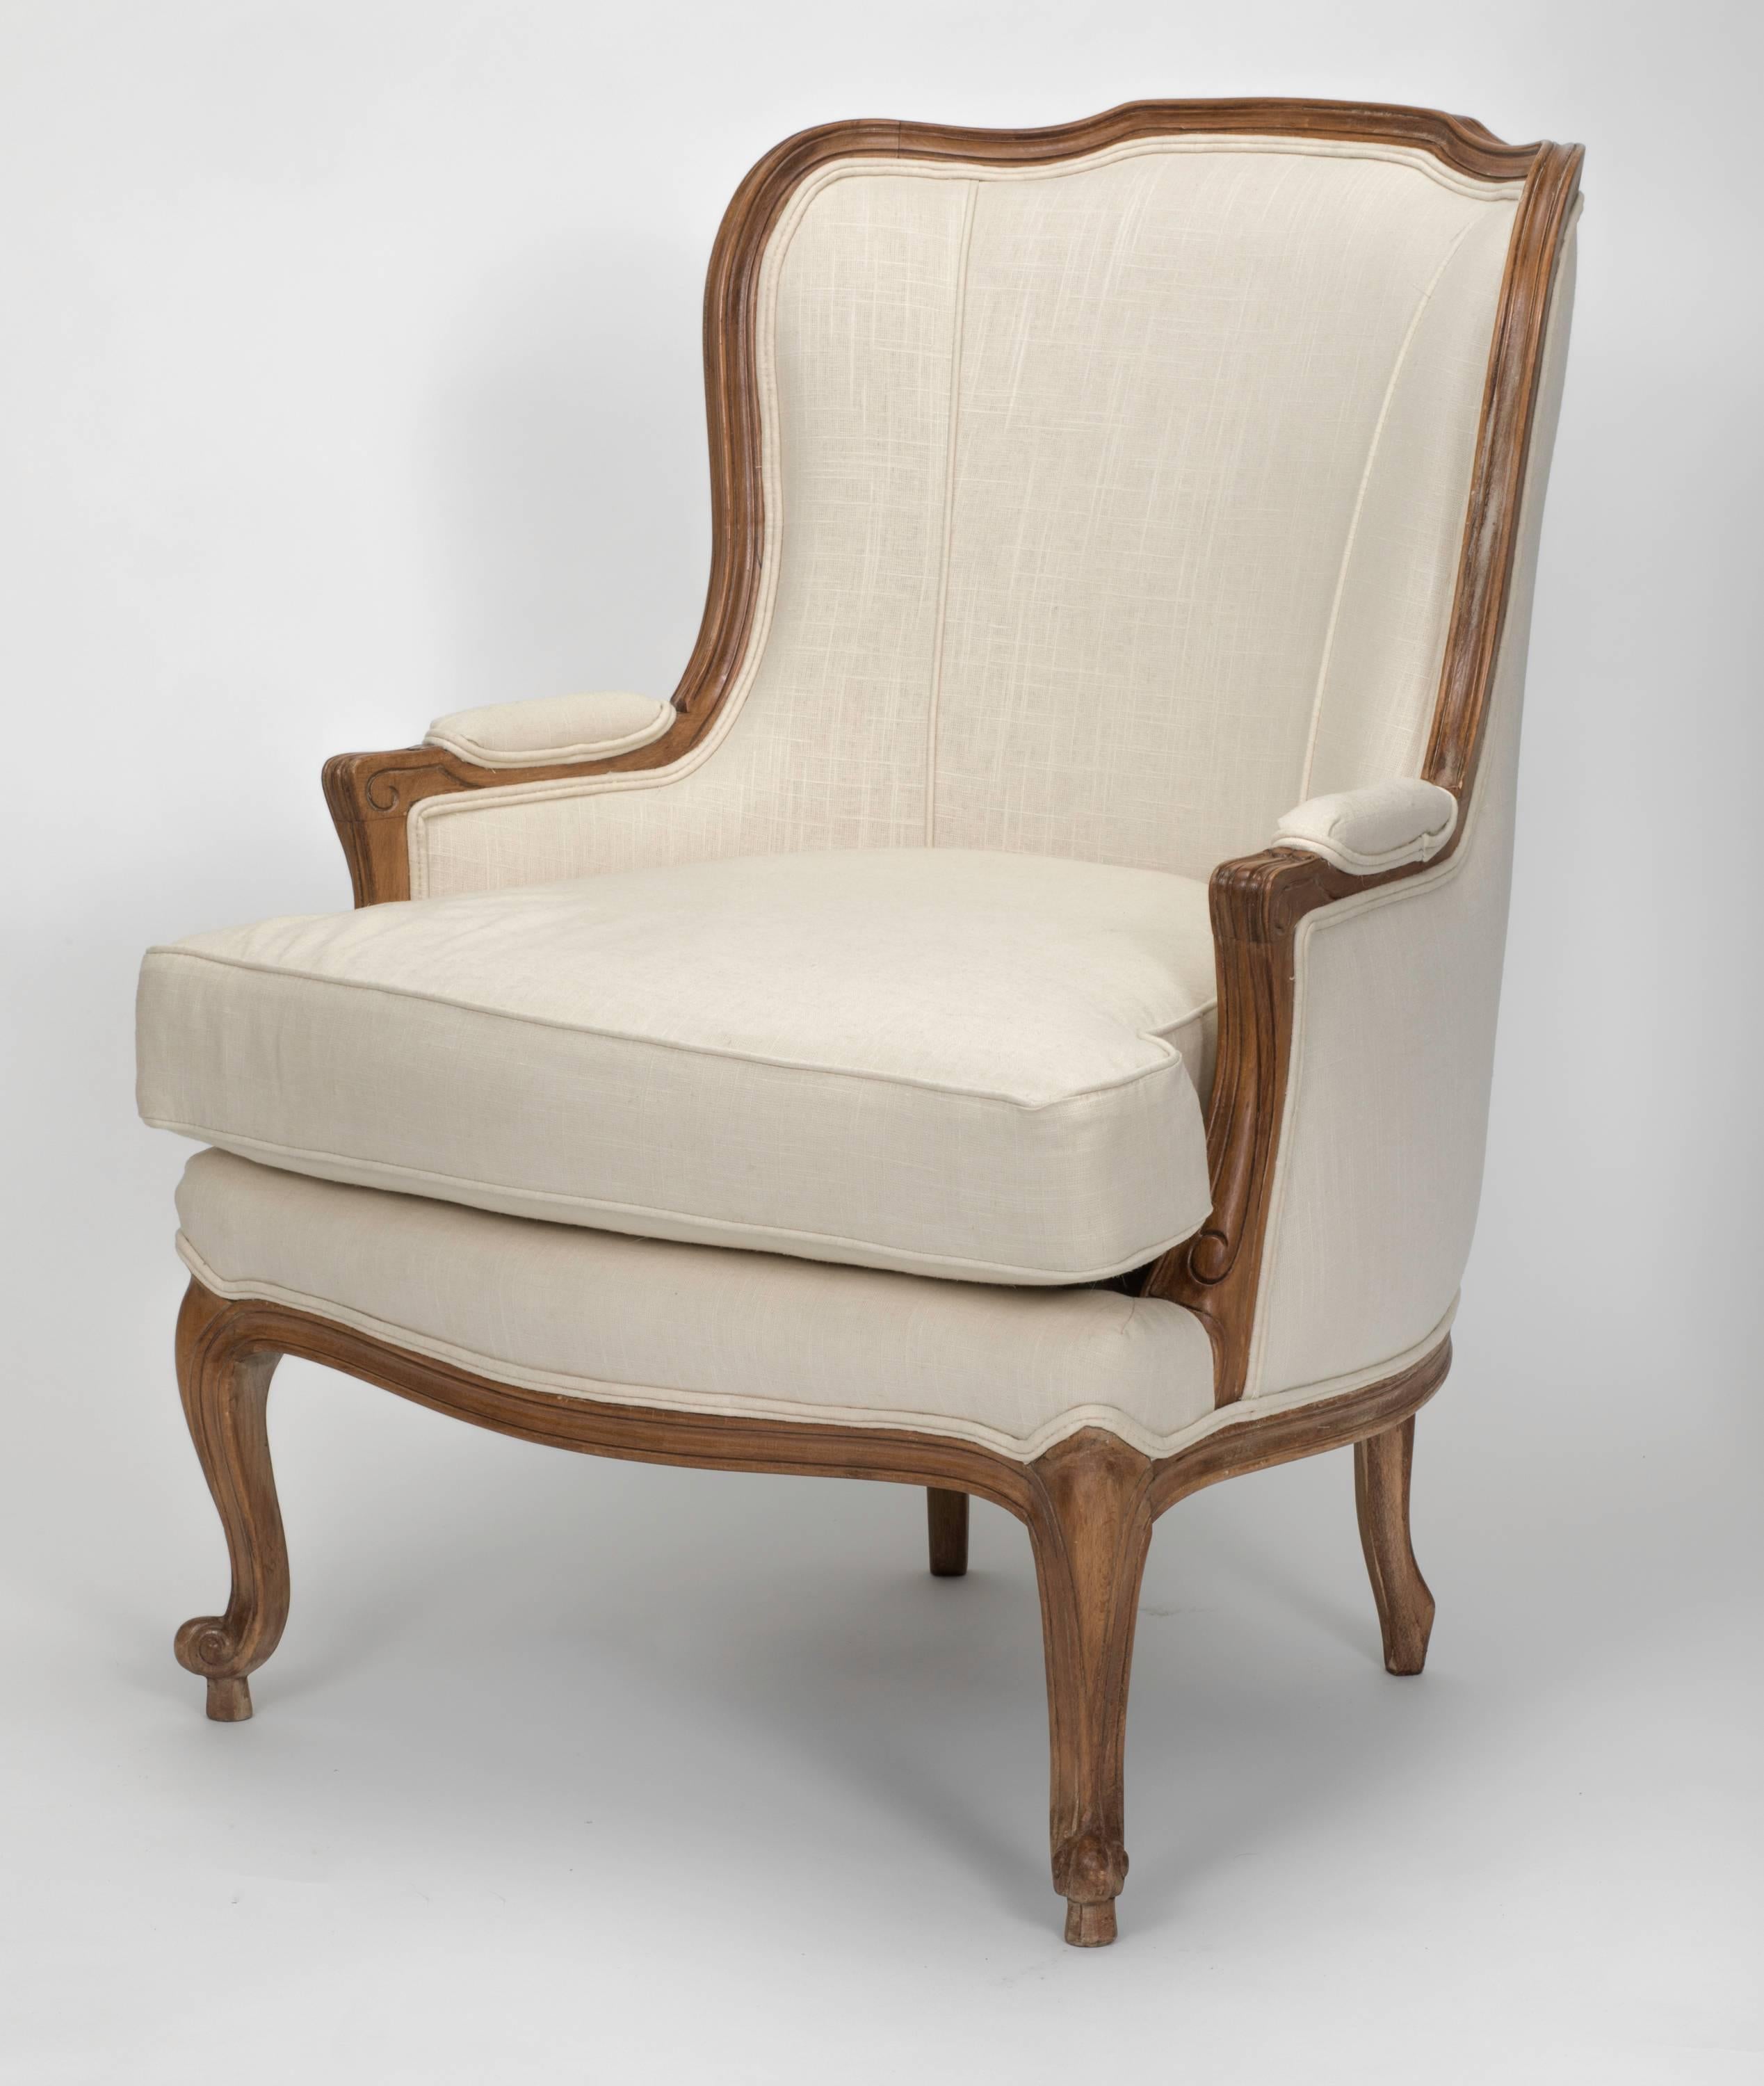 Louis XV style beechwood frame wingback chair. Newly upholstered in creamy white linen. Beautiful clean lines, very comfortable chair.